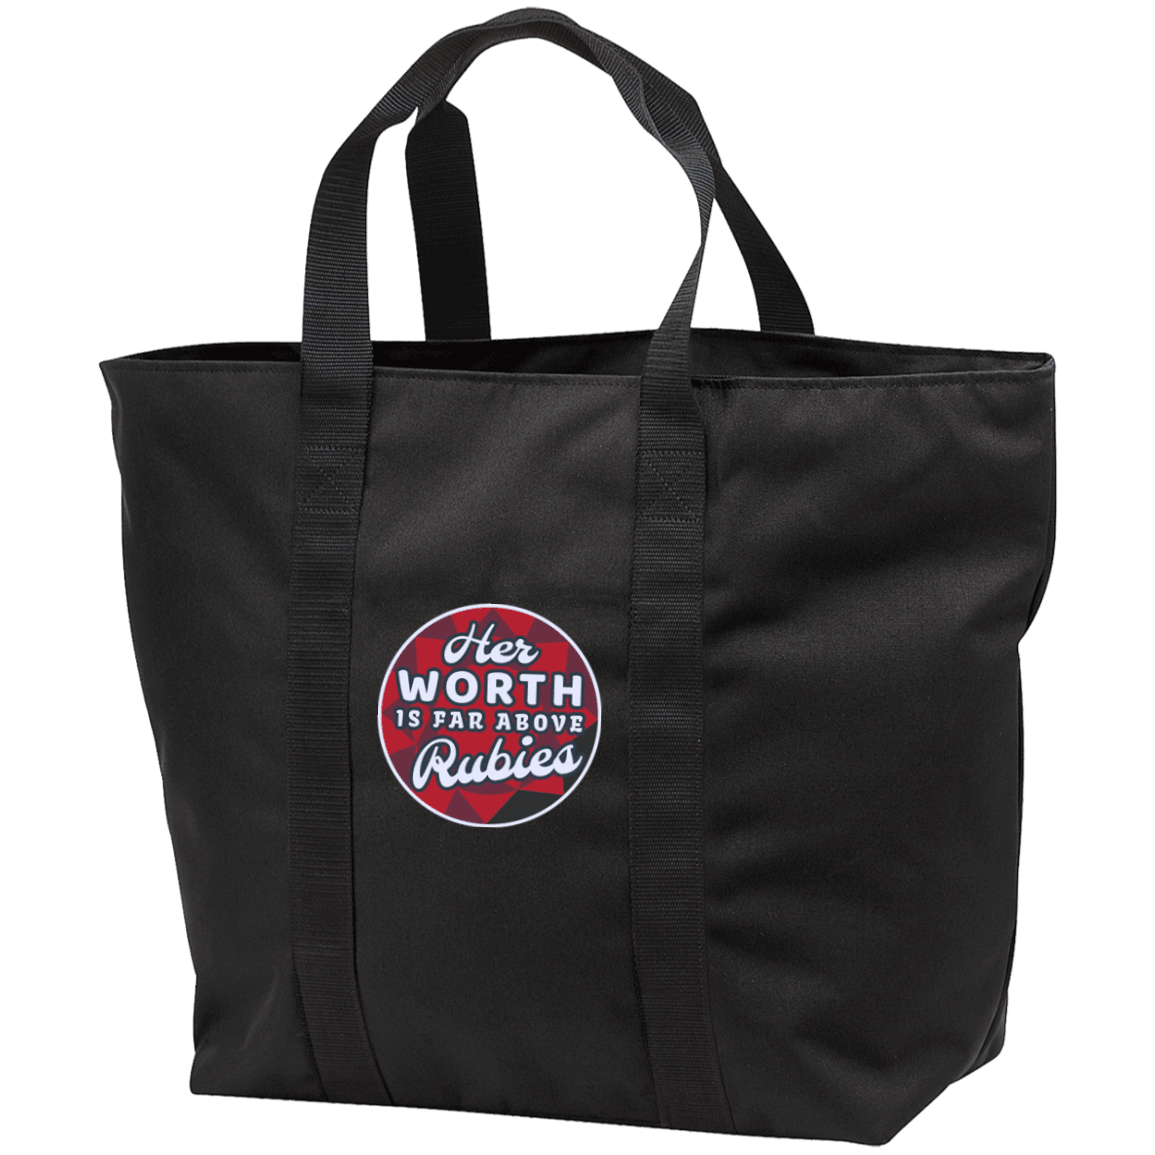 Designs by MyUtopia Shout Out:Her Worth Is Far Above Rubies Embroidered All Purpose Tote Bag w Zipper Closure and side pocket,Black/Black / One Size,Totebag